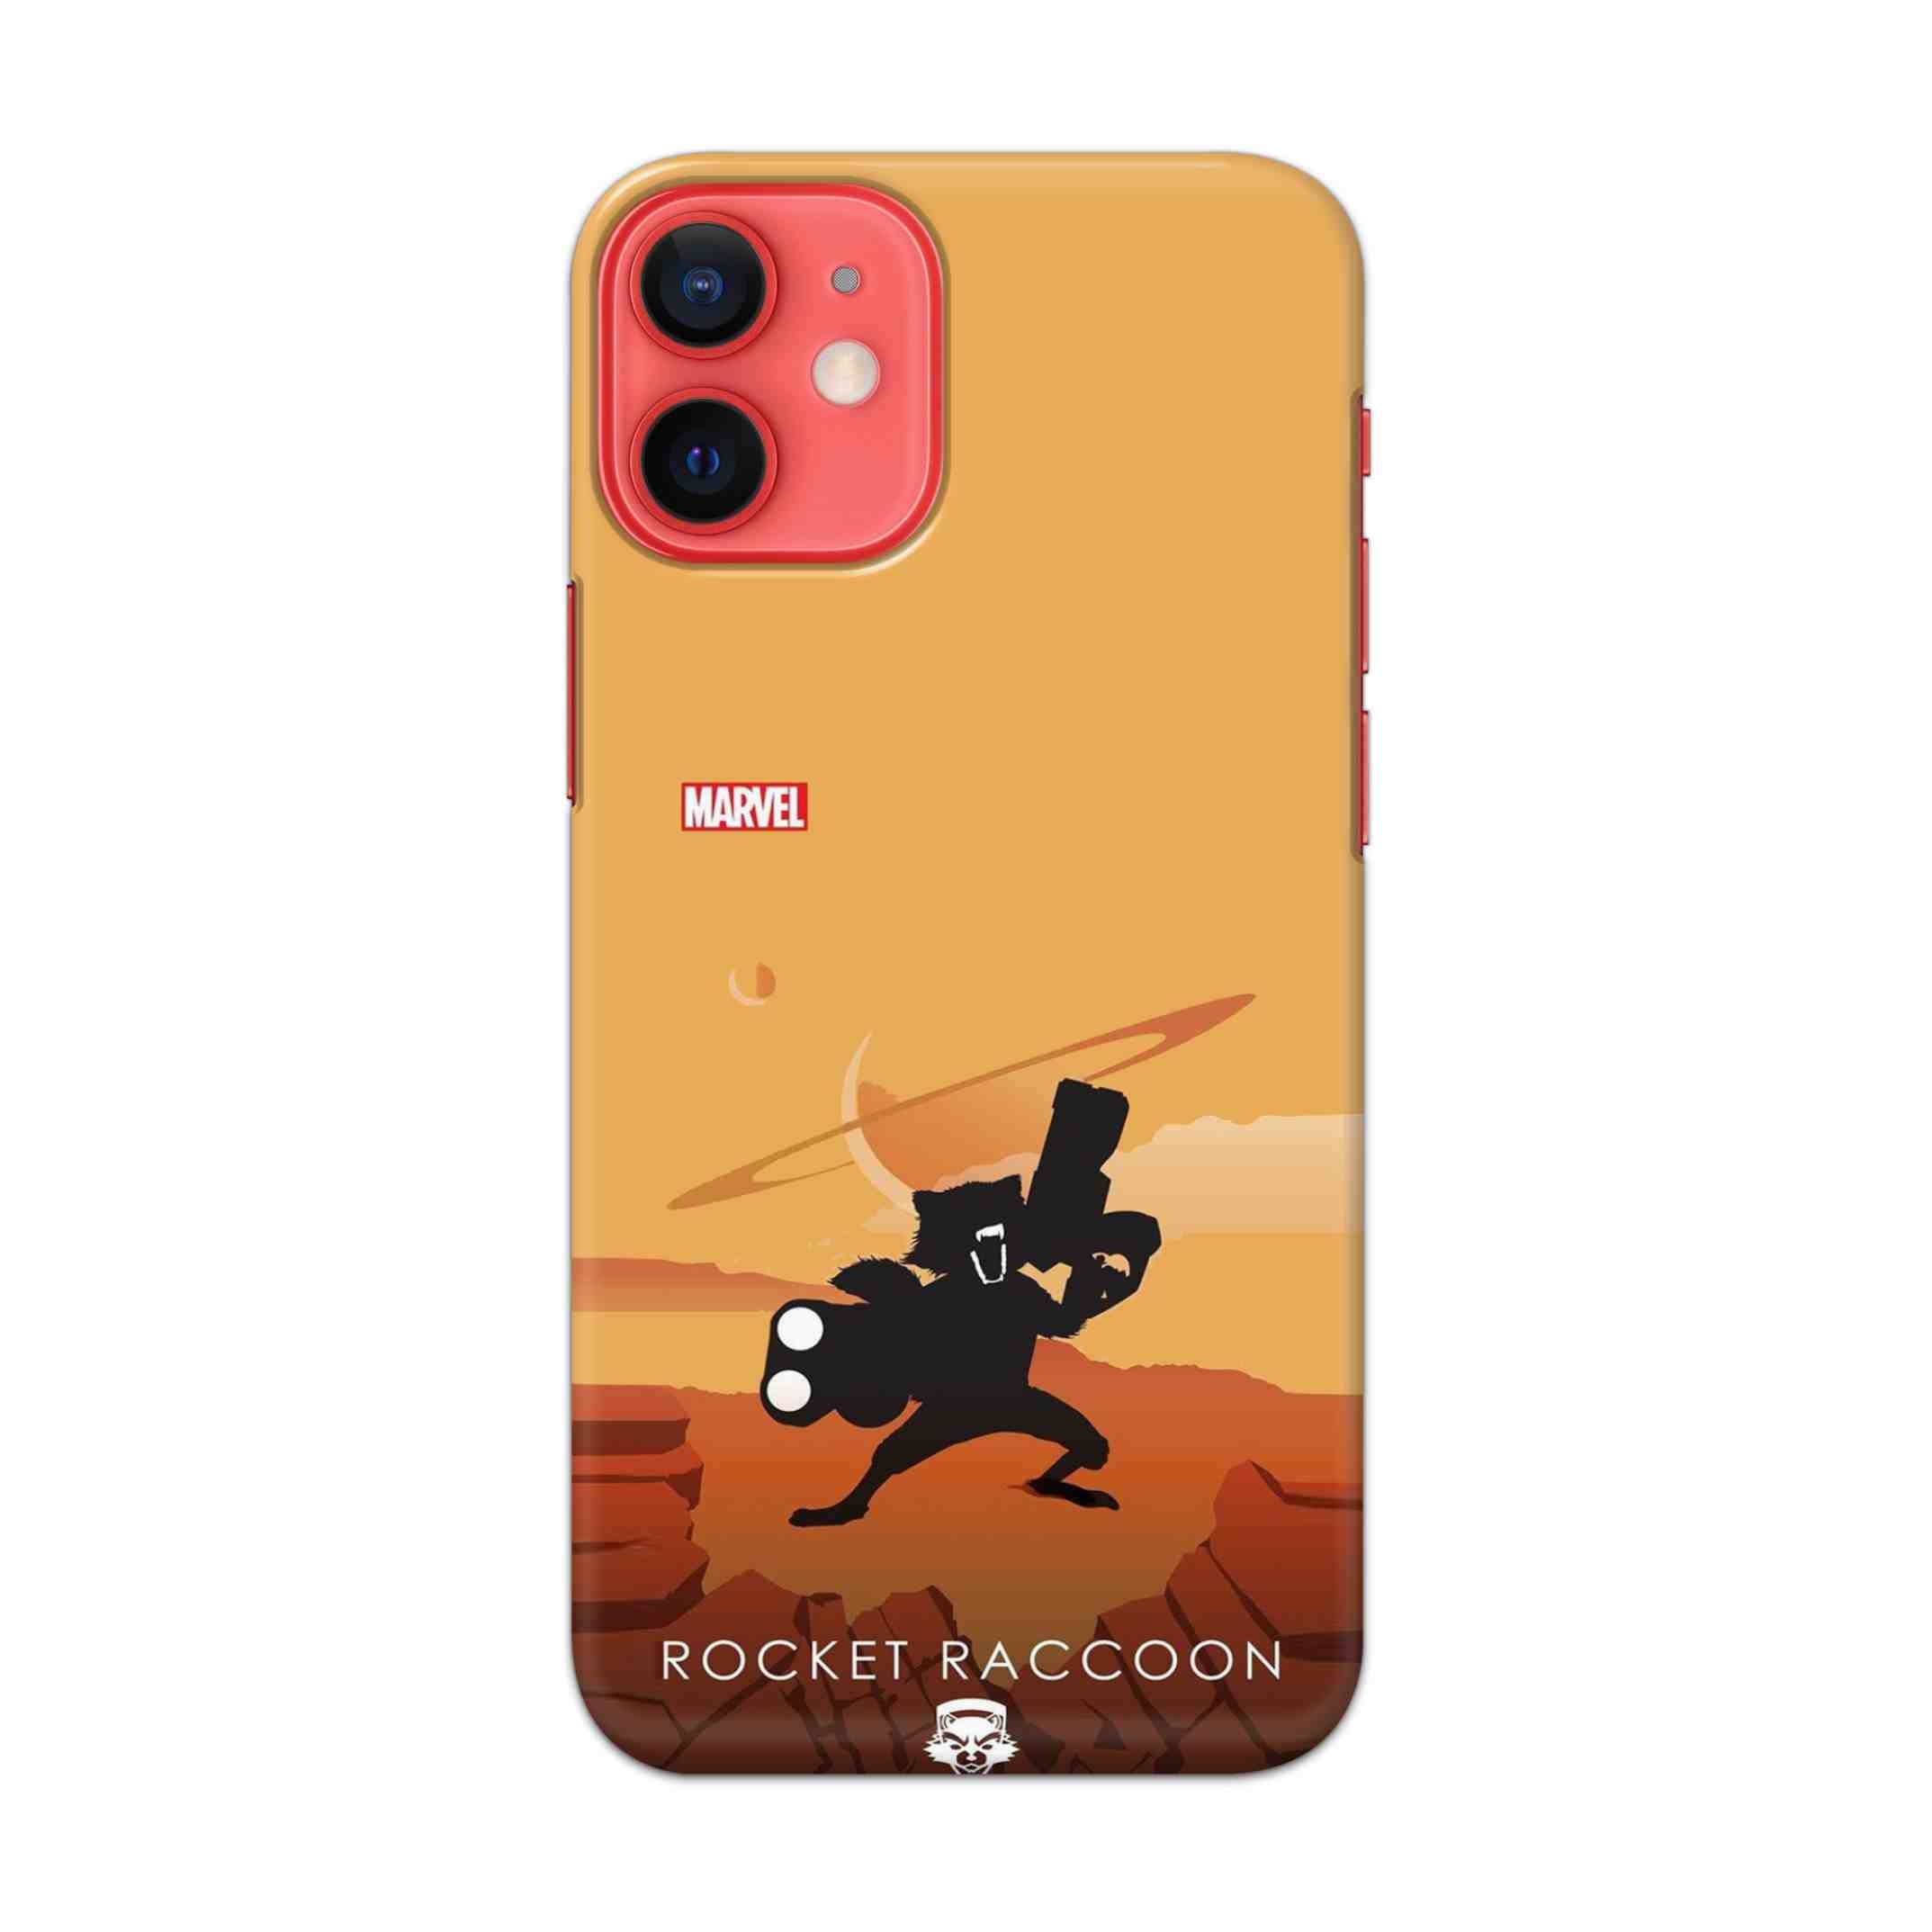 Buy Rocket Raccon Hard Back Mobile Phone Case/Cover For Apple iPhone 12 mini Online